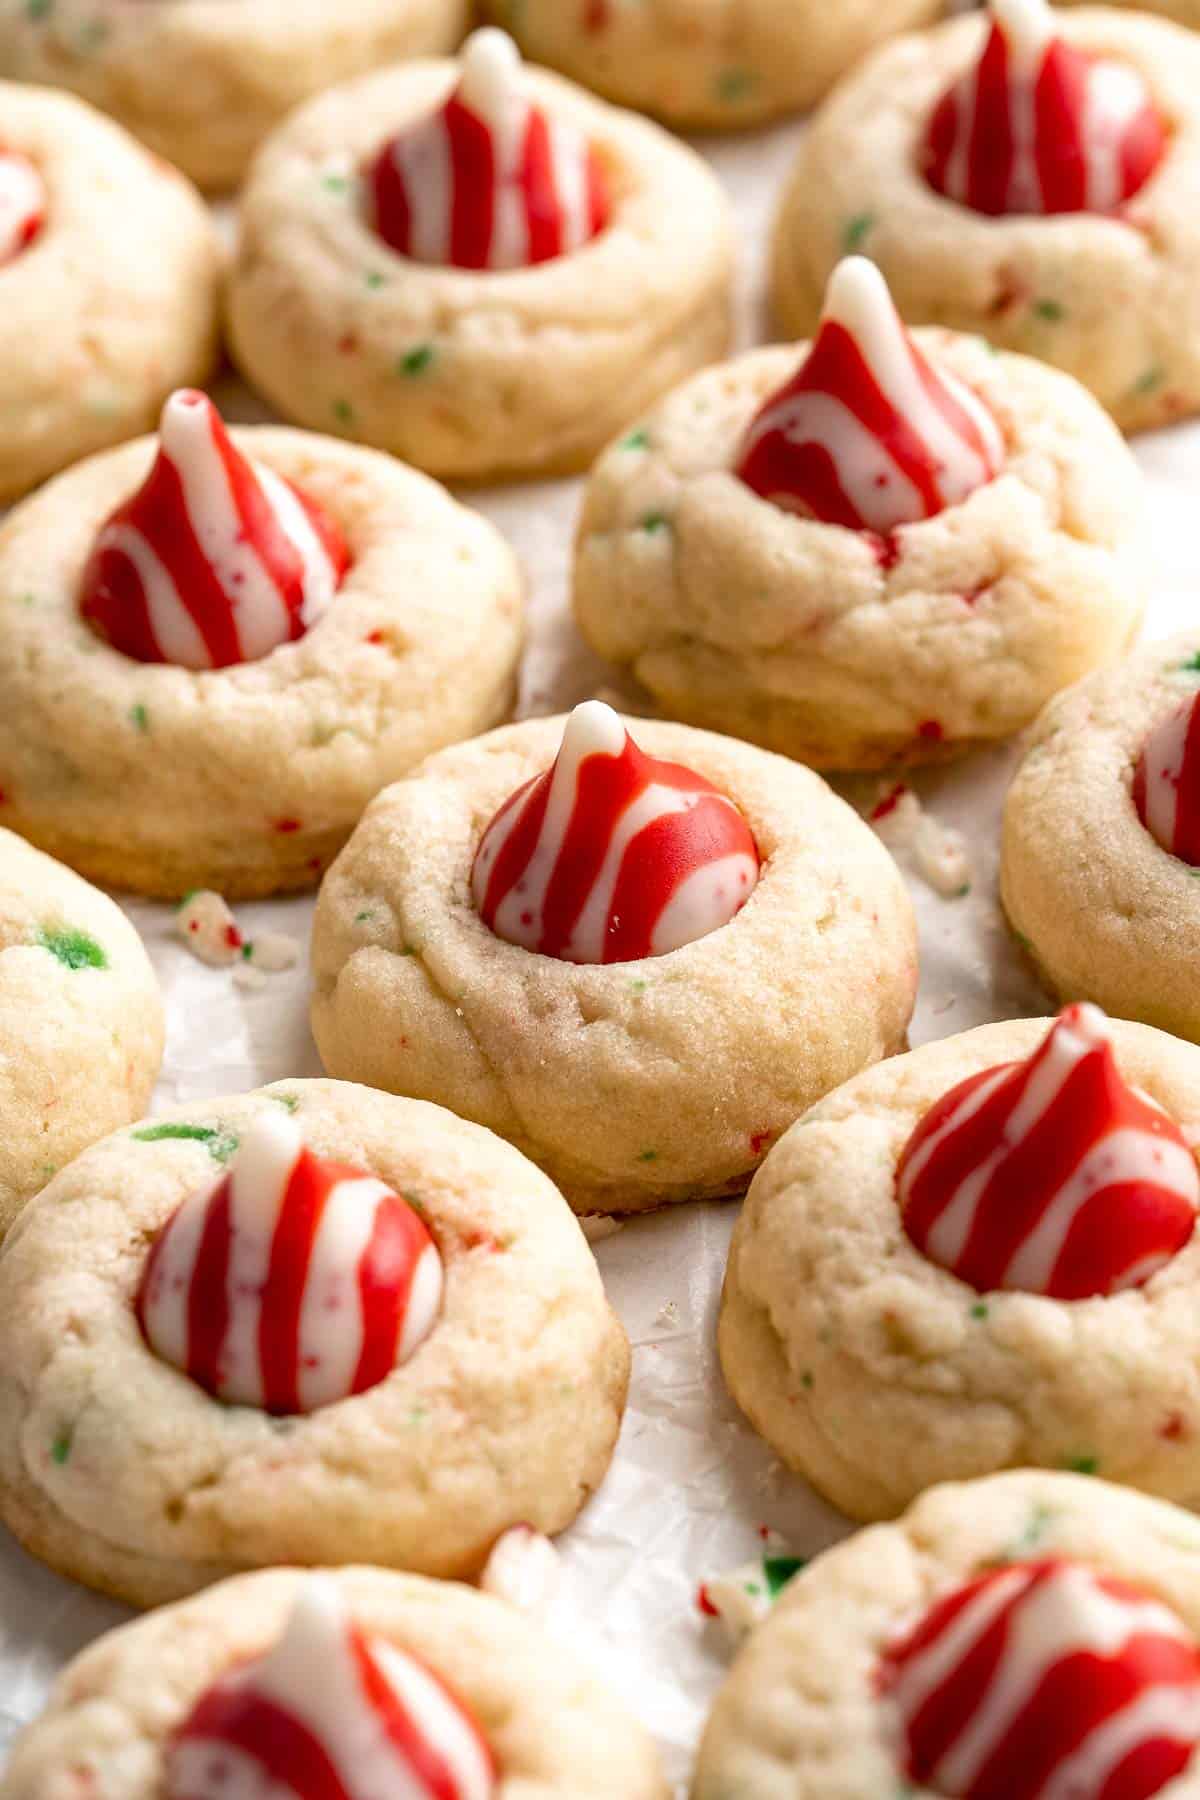 Sweet and crunchy Peppermint Kiss Cookies are the perfect Christmas cookies made with a sugar cookie dough, real candy canes, and a peppermint kiss on top. | aheadofthyme.com